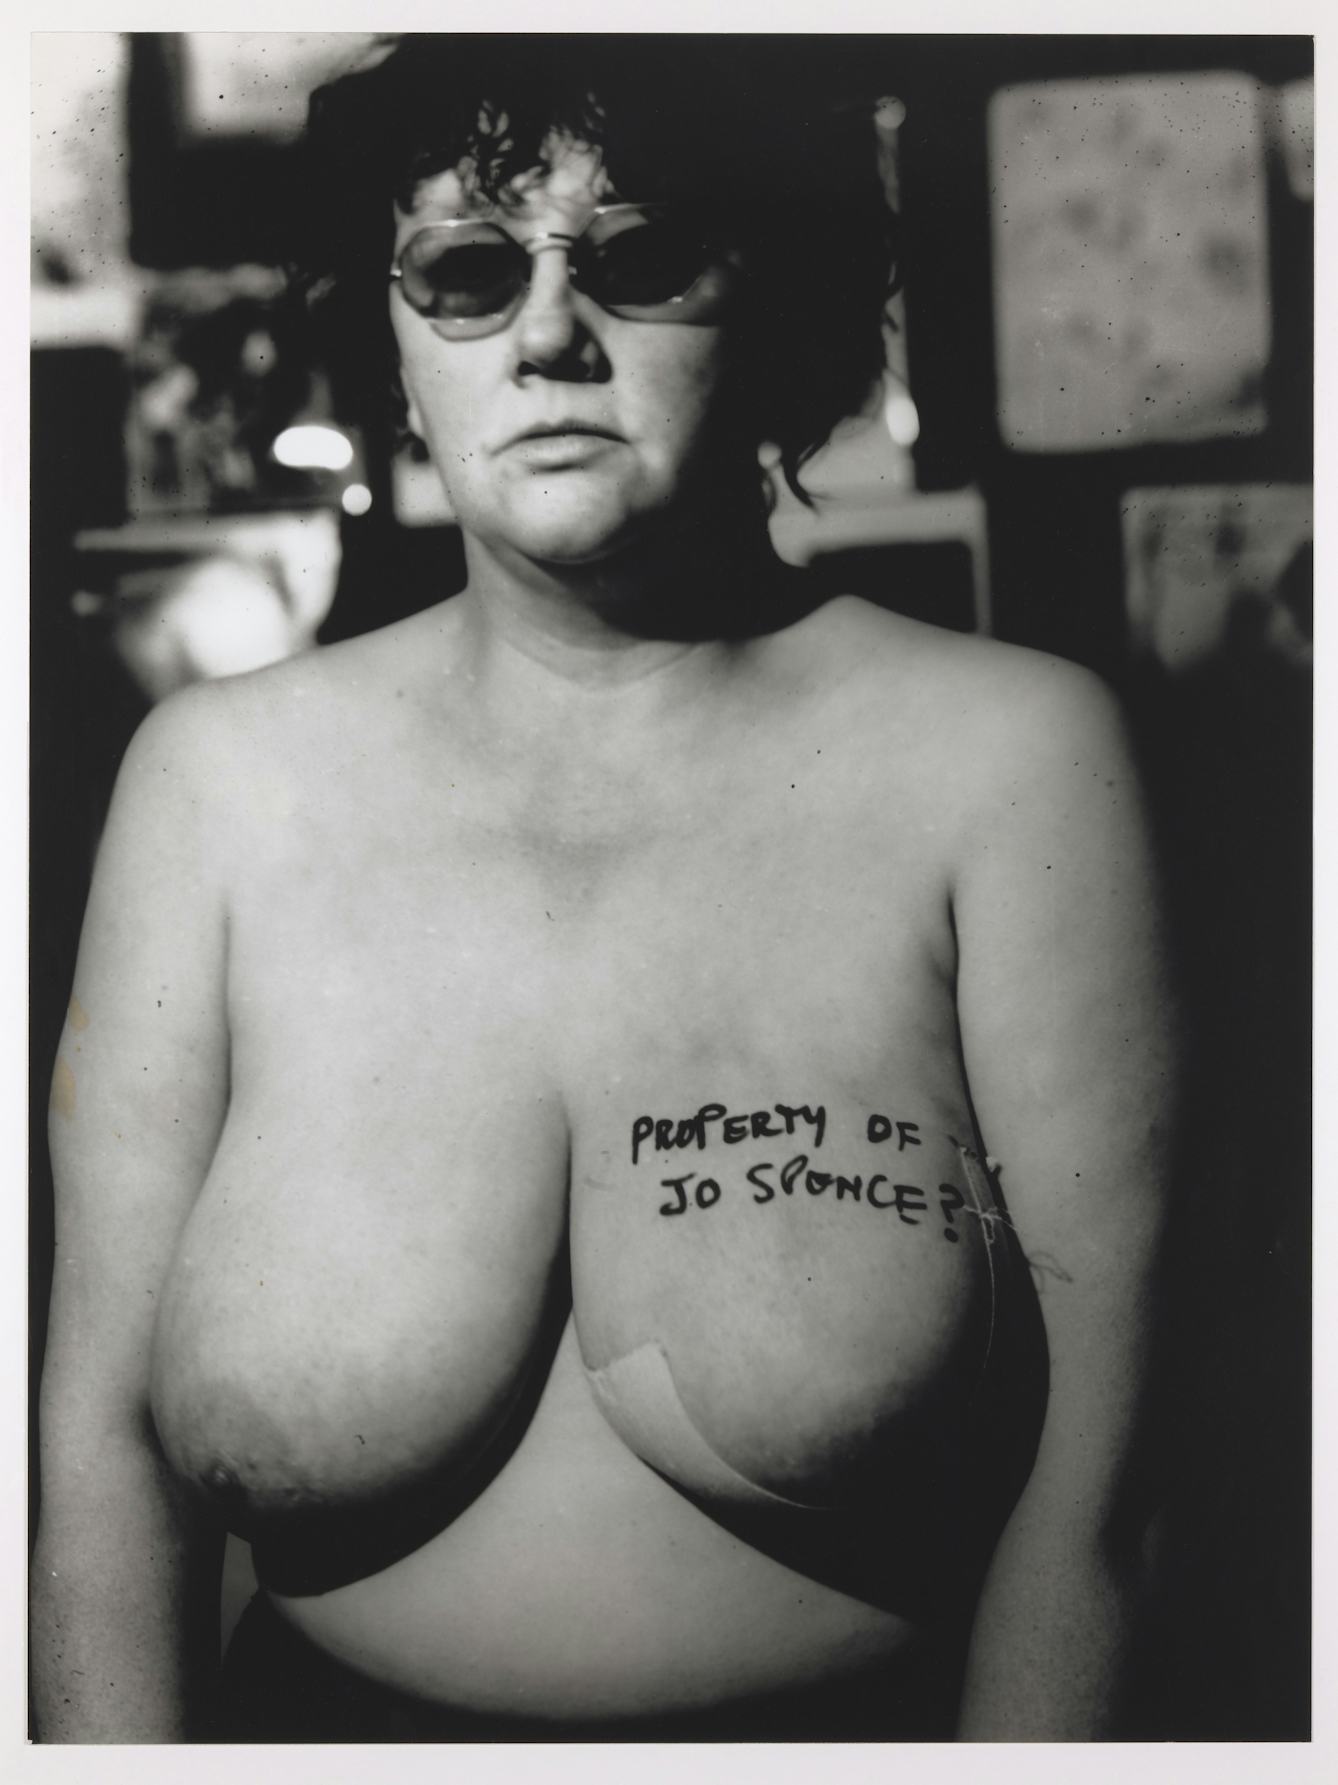 Self-portrait of Jo Spence, naked, with a dressing and 'Property of Jo Spence?' written in black marker on her left breast